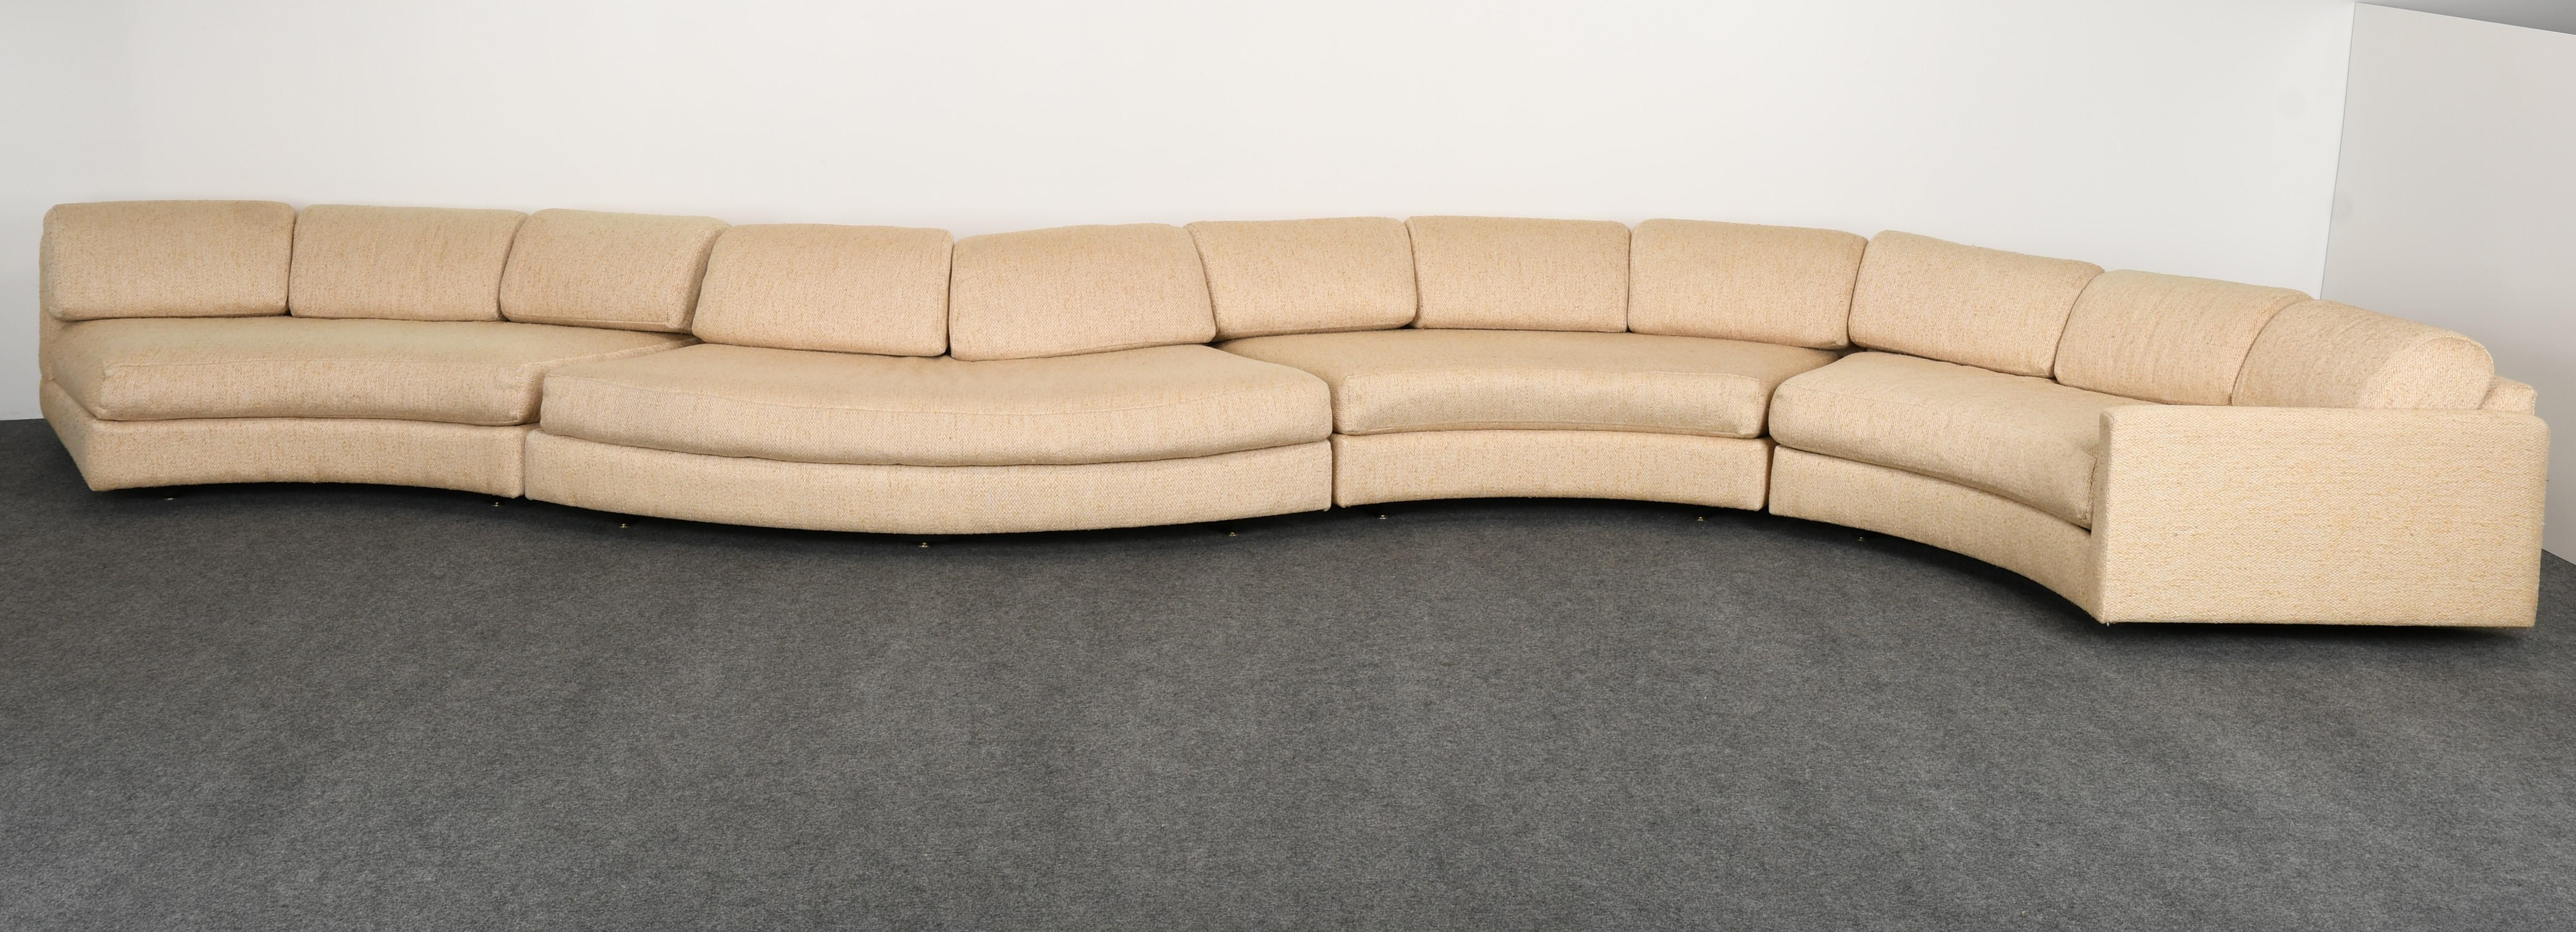 A monumental Adrian Pearsall sectional sofa for Craft Associates. This sectional sofa can be arranged in multiple configurations, as shown in the images. This sofa is a statement piece. The sofa is signed/labeled/marked Craft Associates. Original